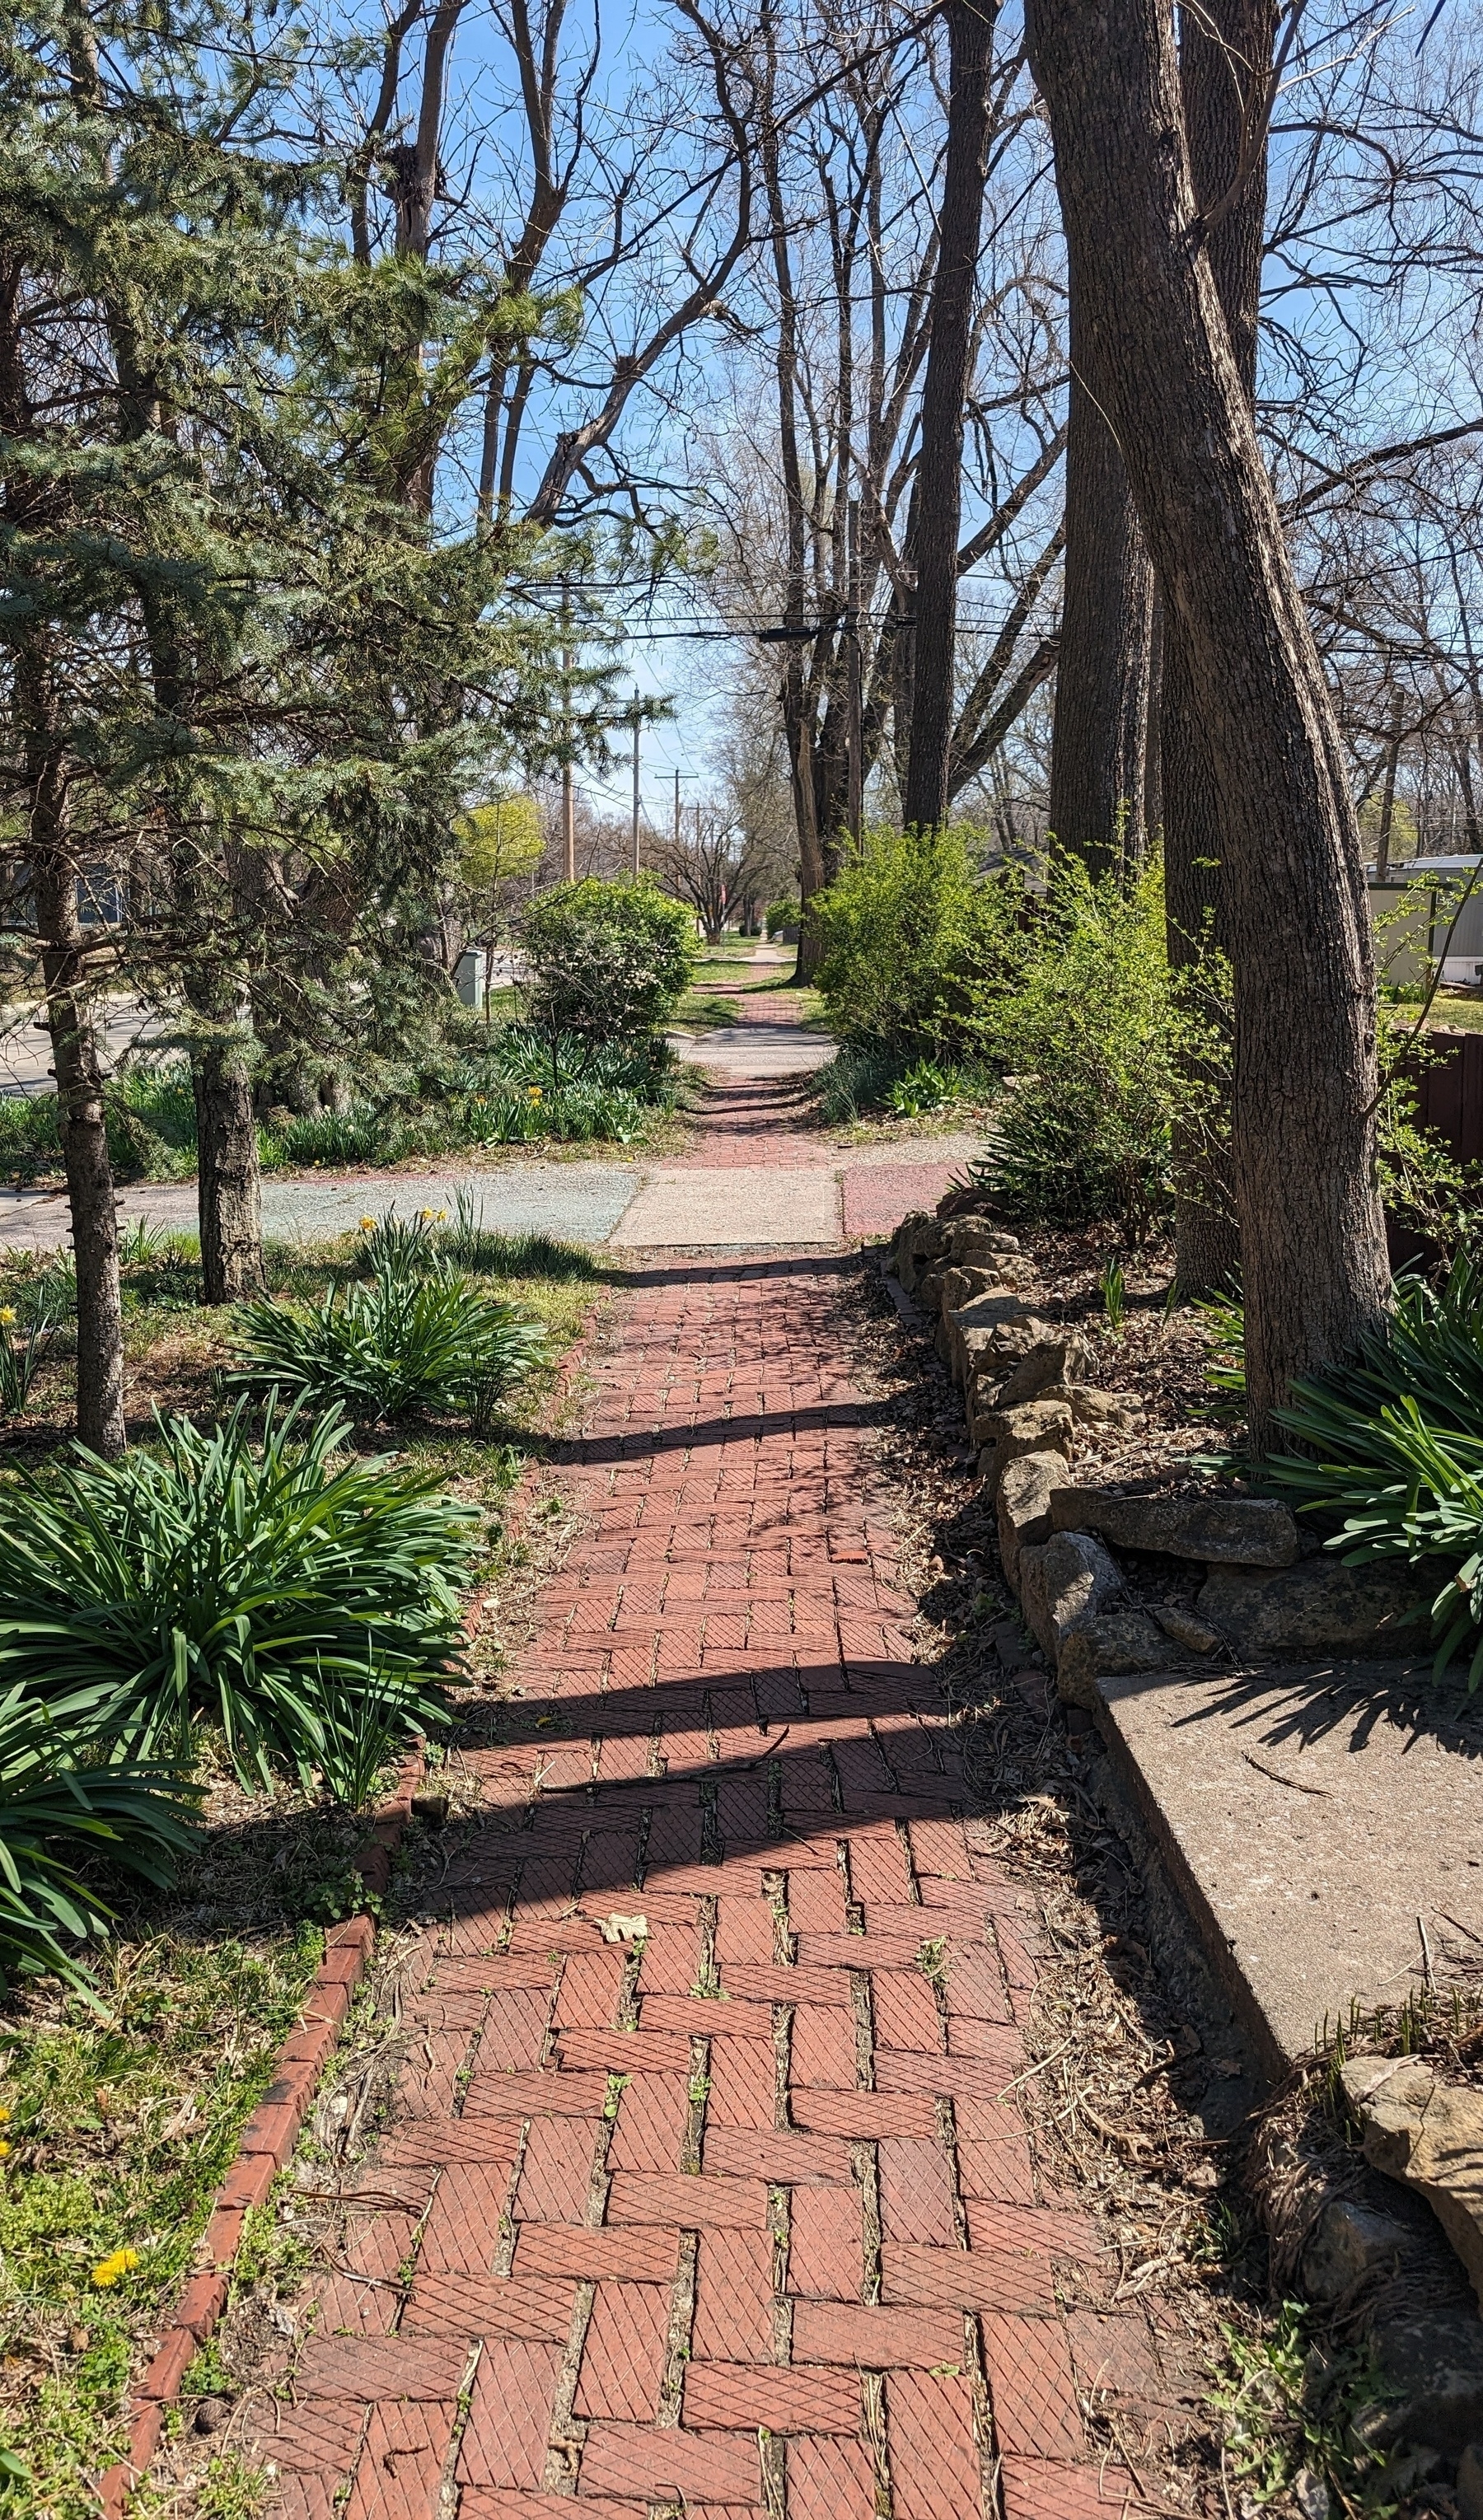 Photo of a red brick sidewalk, framed by trees and other vegetation.